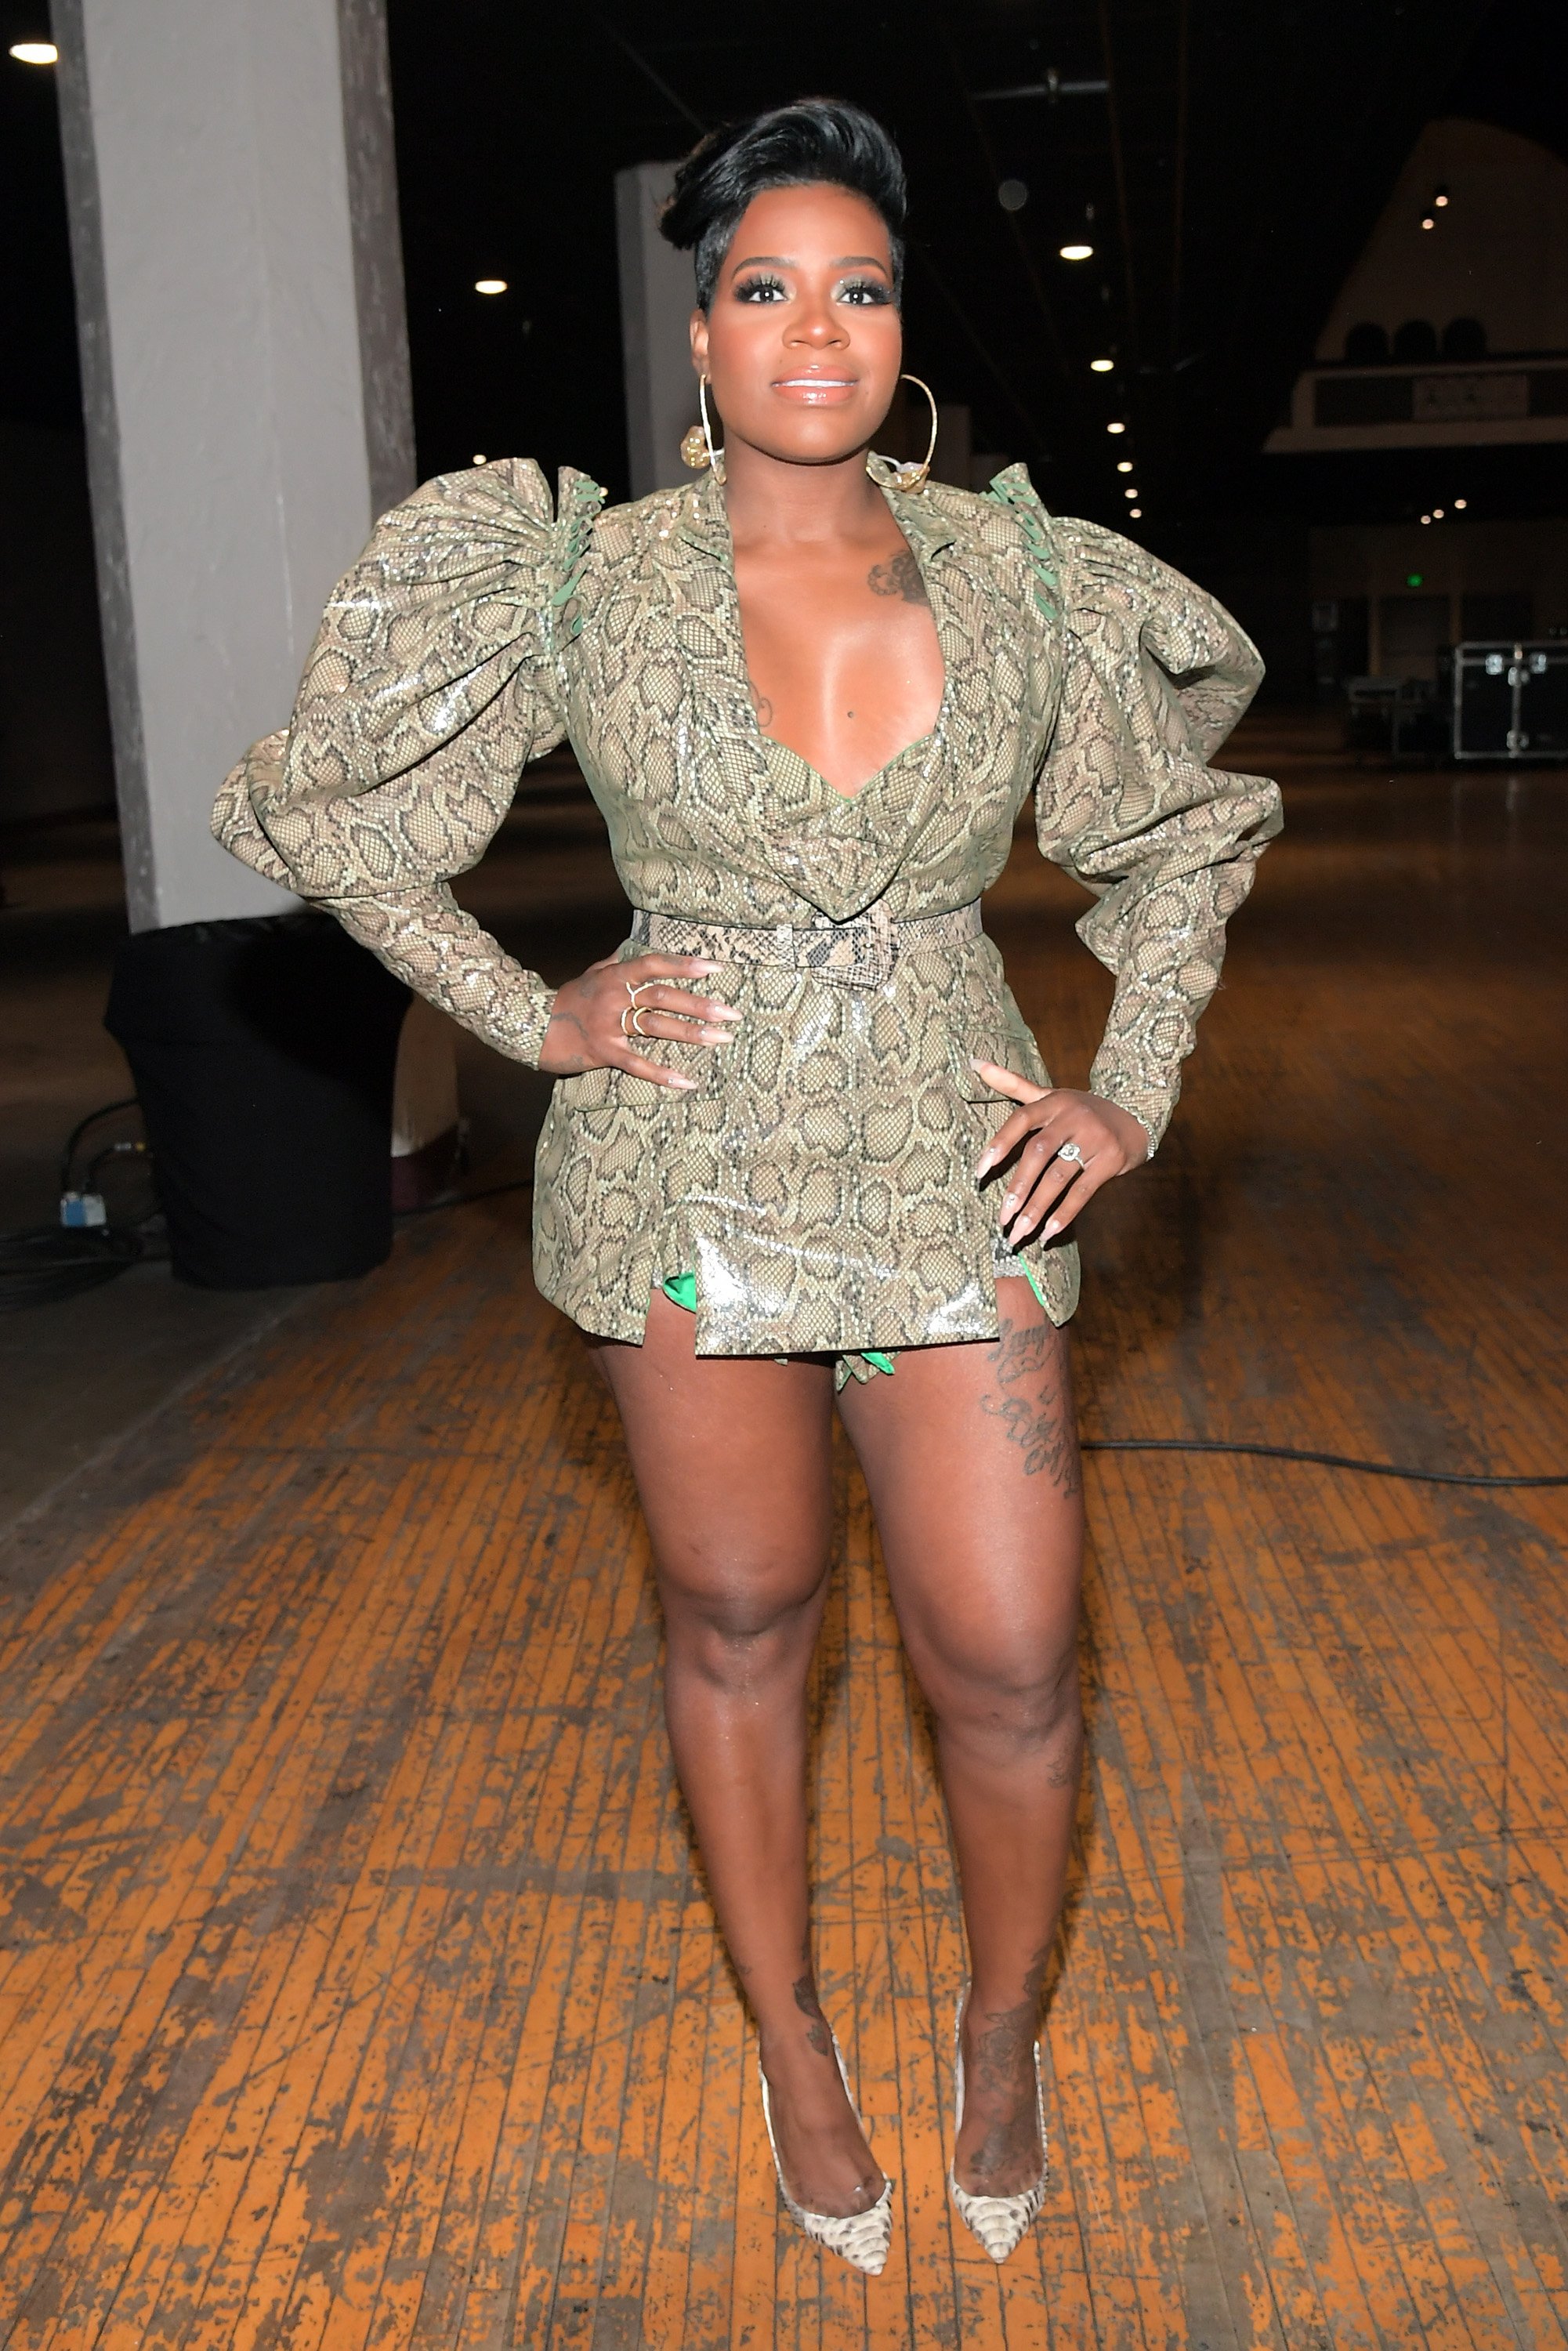 Fantasia Barrino attends “Aretha! A Grammy Celebration For the Queen of Soul.” at The Shrine Auditorium on January 13, 2019 in Los Angeles, California. | Source: Getty Images